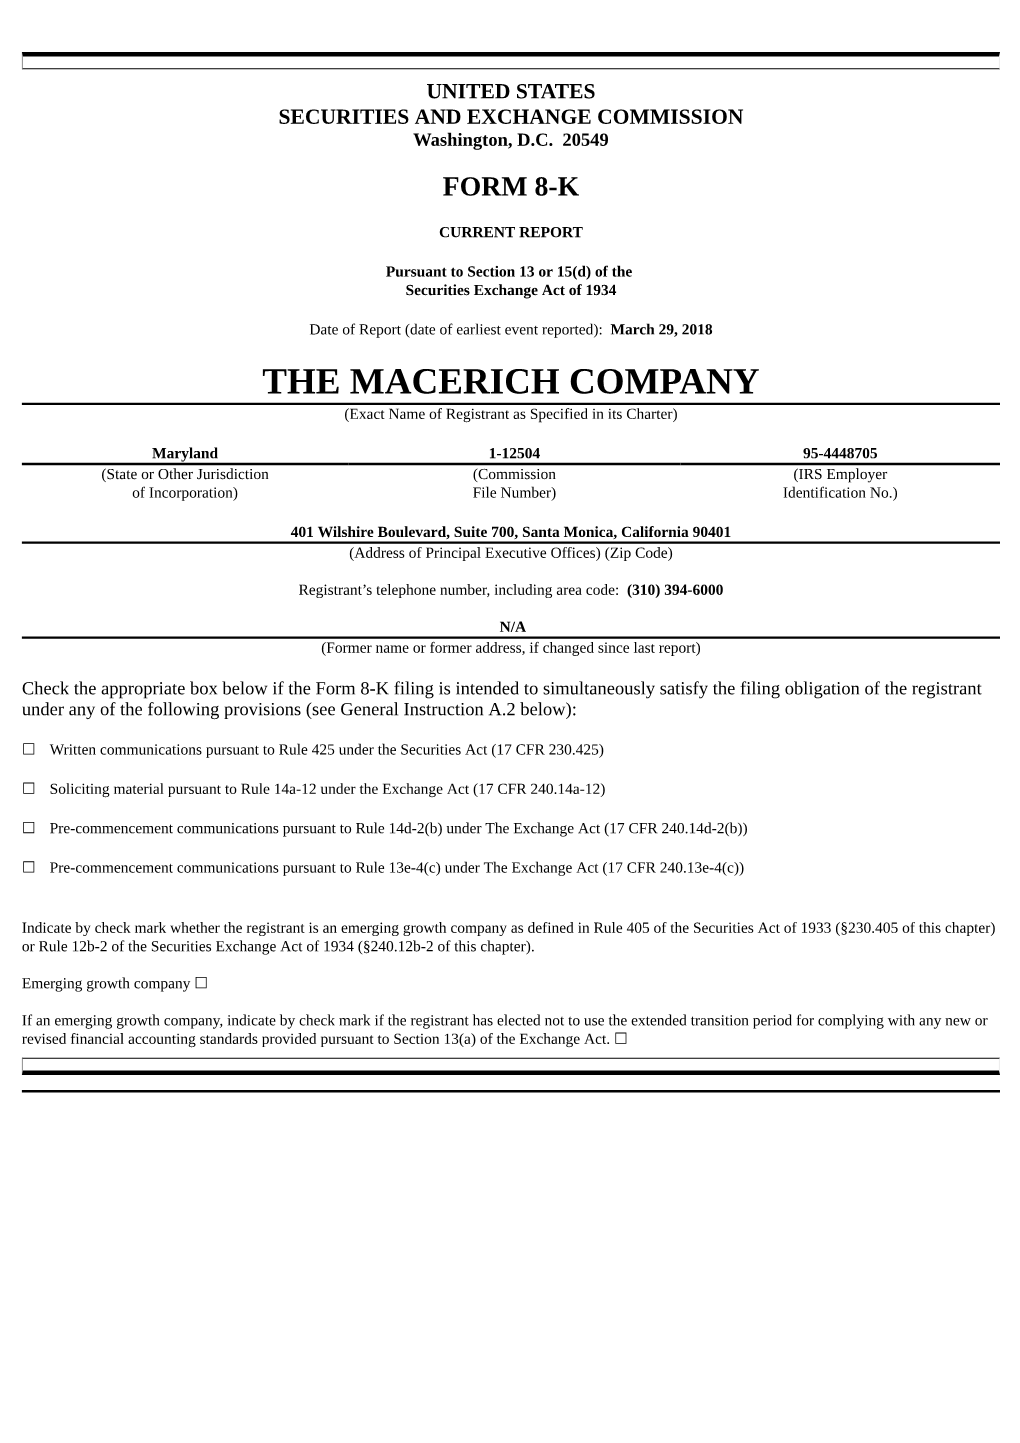 THE MACERICH COMPANY (Exact Name of Registrant As Specified in Its Charter)